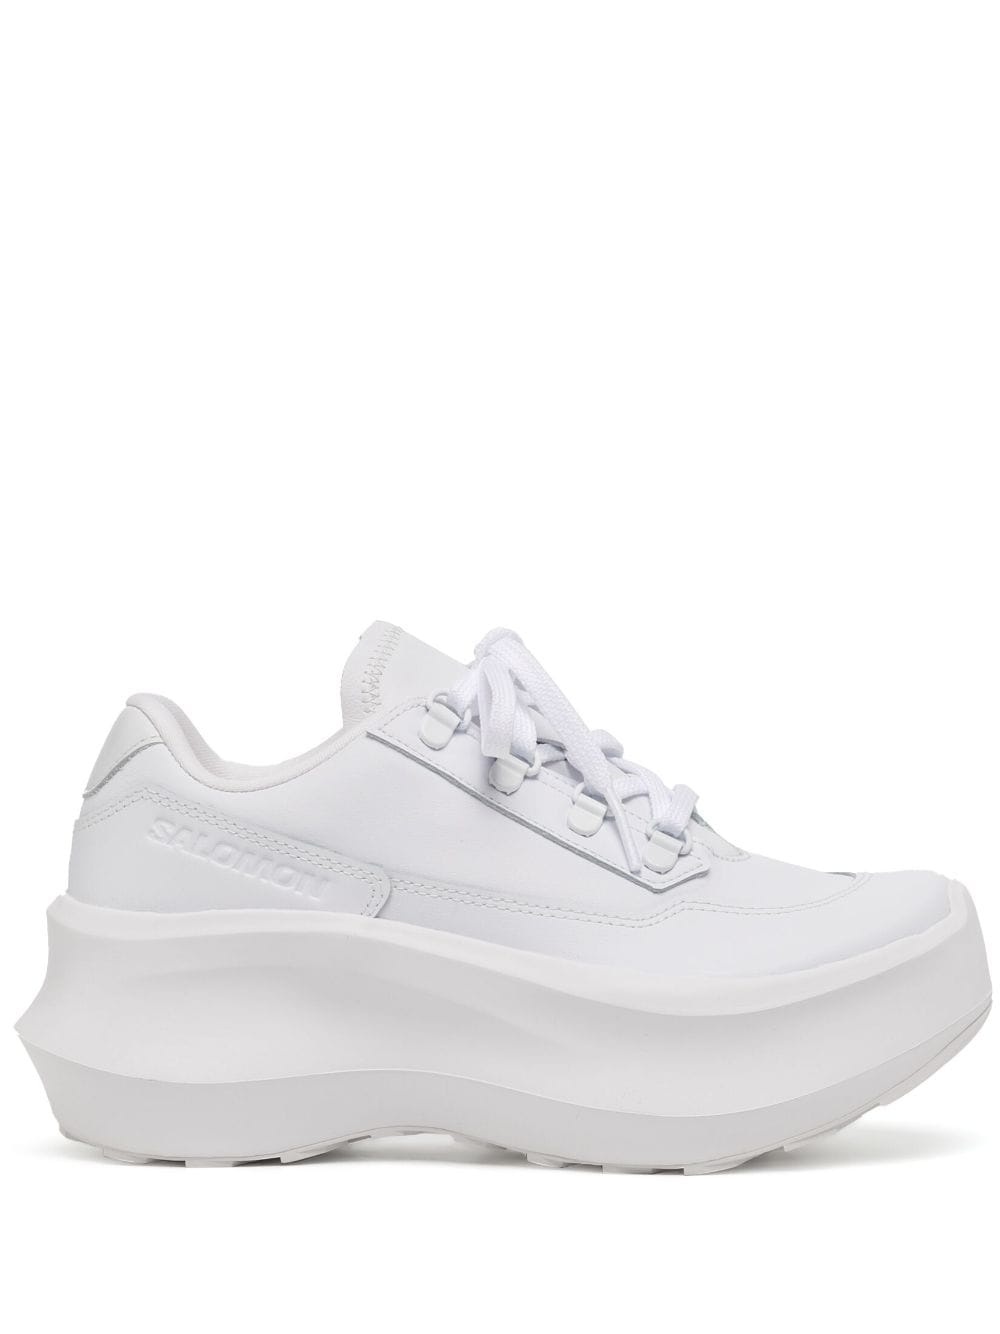 75mm leather platform sneakers - 1